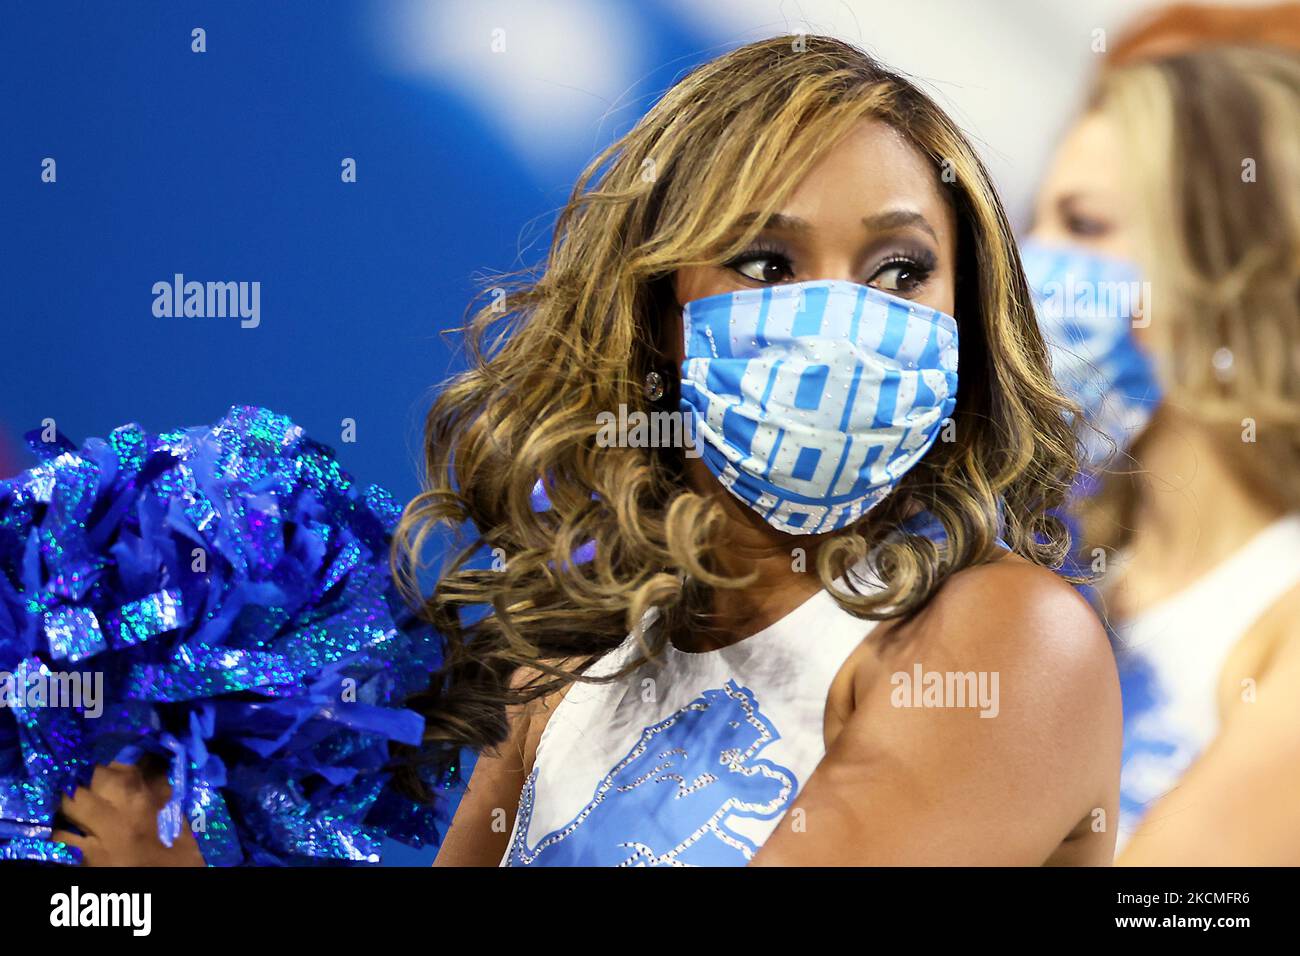 A Detroit Lions cheerleader performs during an NFL football game between the Detroit Lions and the San Francisco 49ers in Detroit, Michigan USA, on Sunday, September 12, 2021. (Photo by Amy Lemus/NurPhoto) Stock Photo